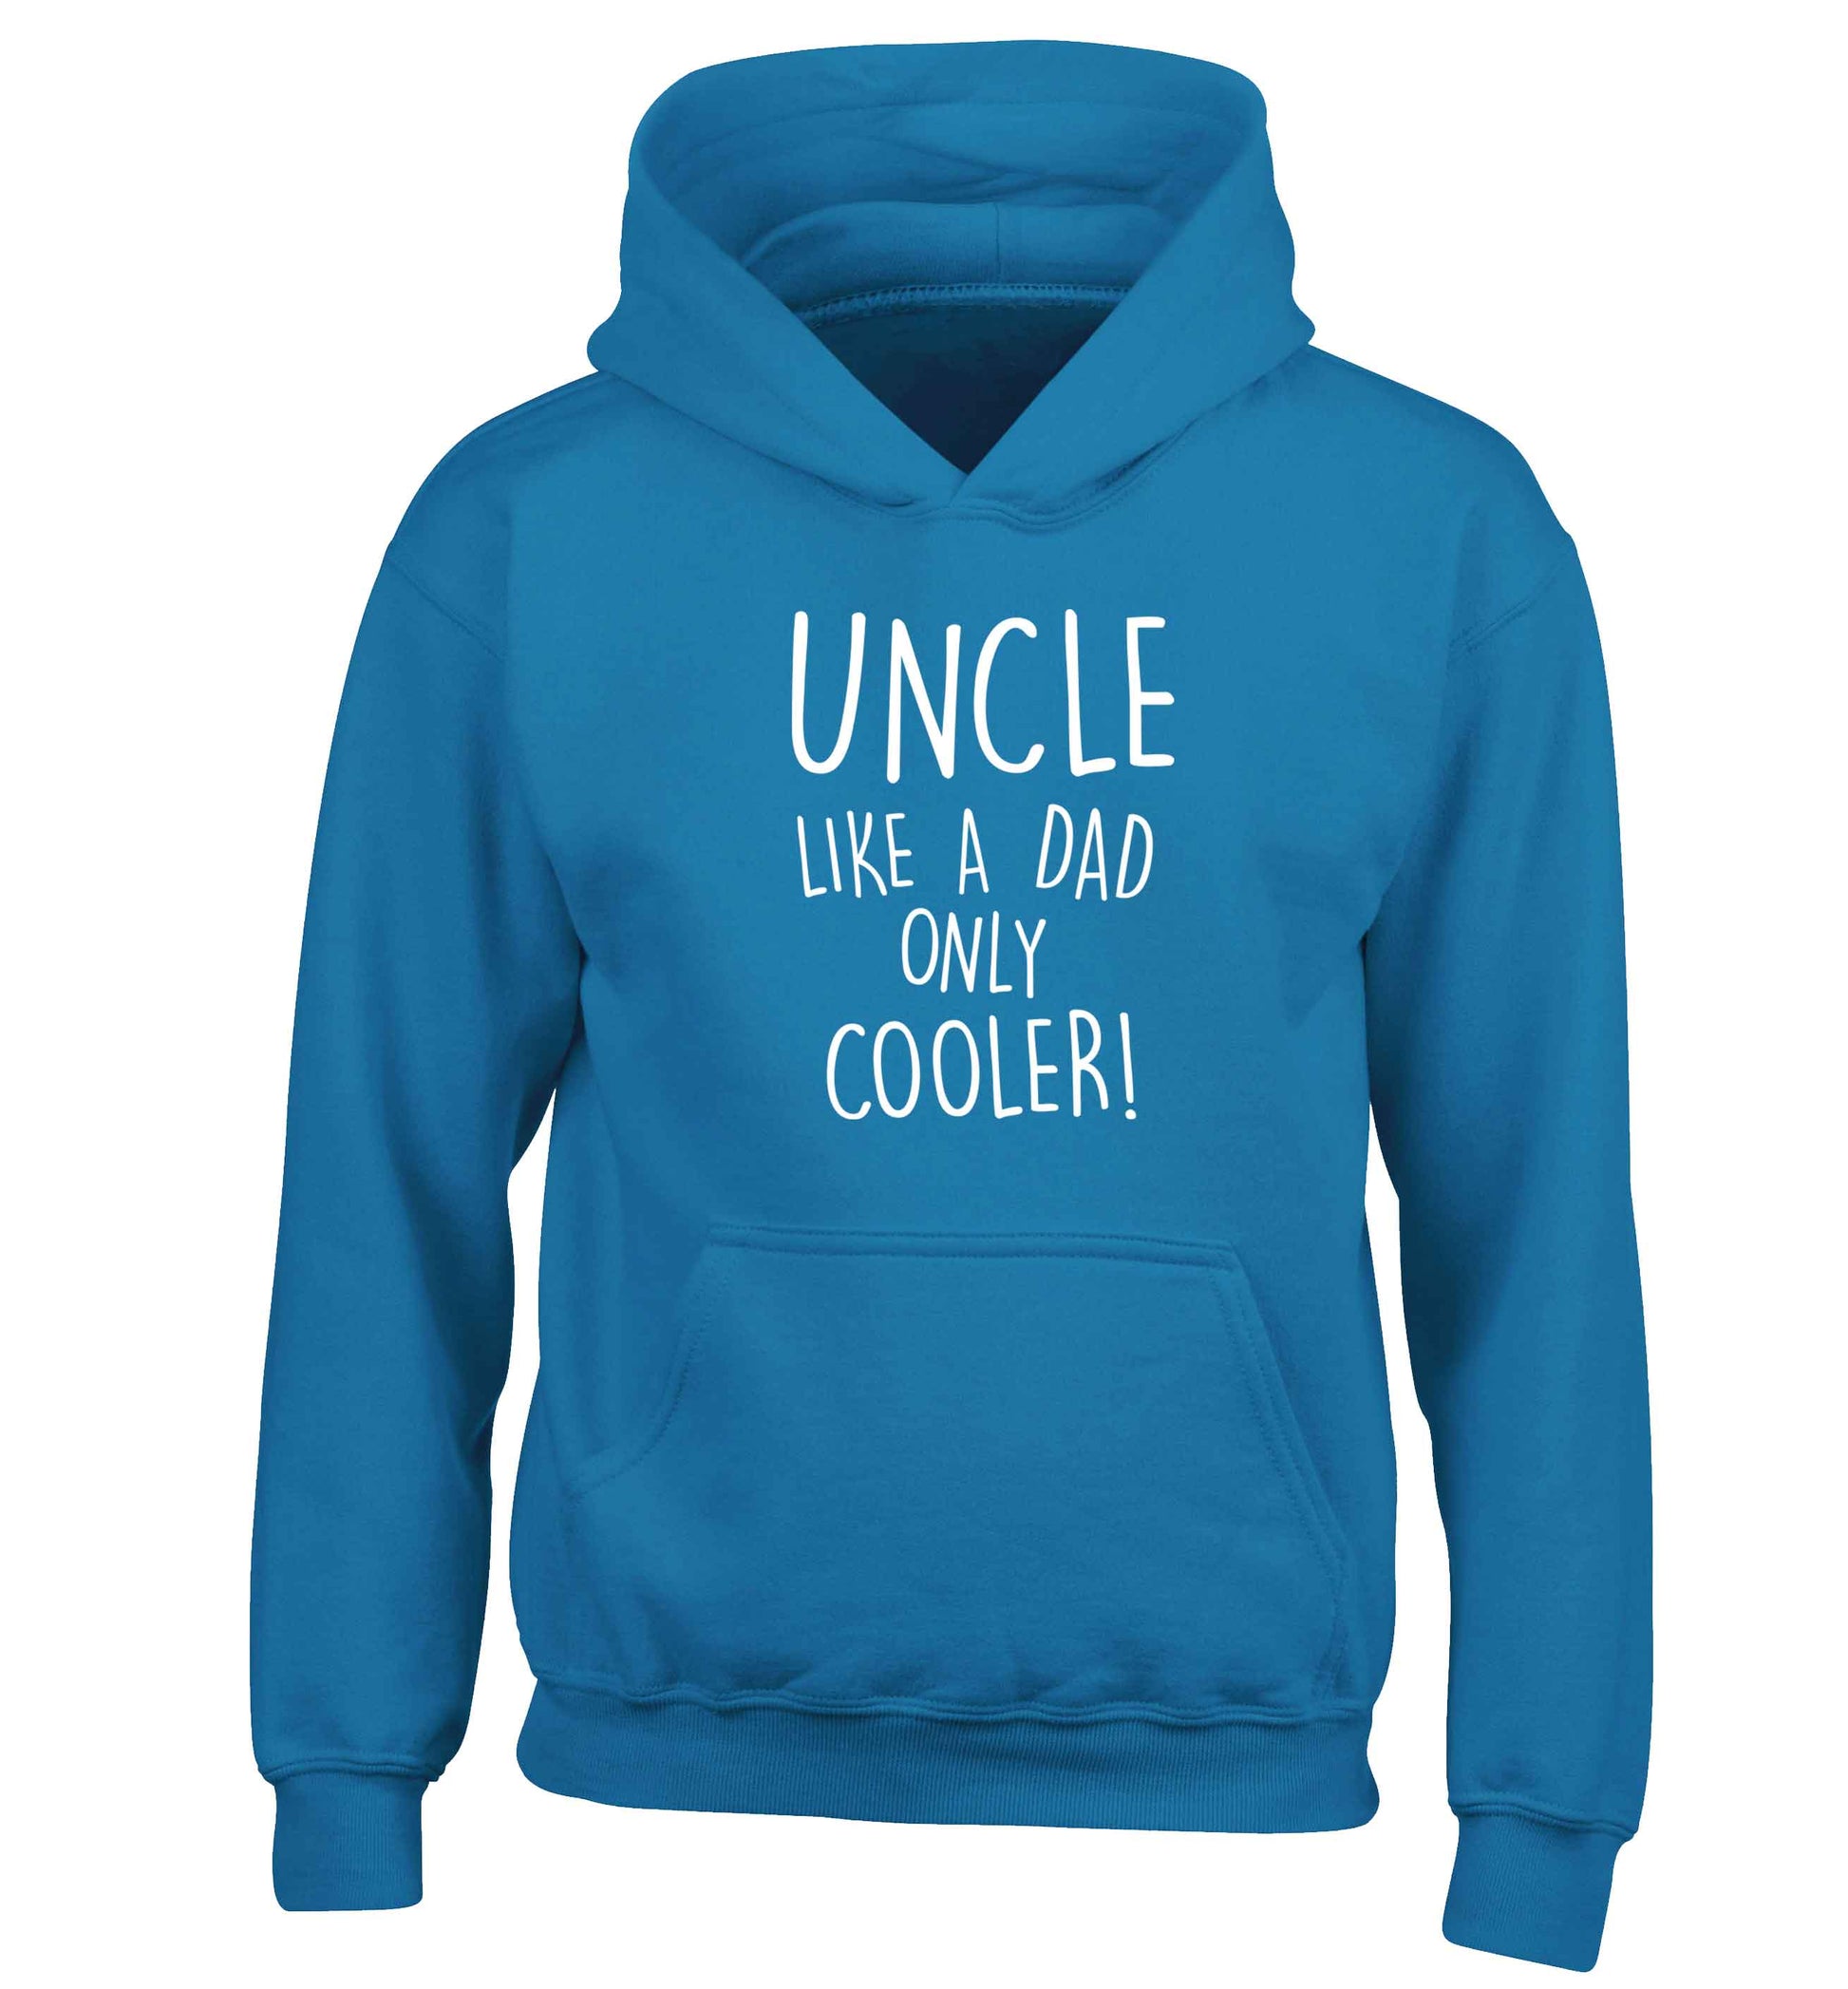 Uncle like a dad only cooler children's blue hoodie 12-13 Years